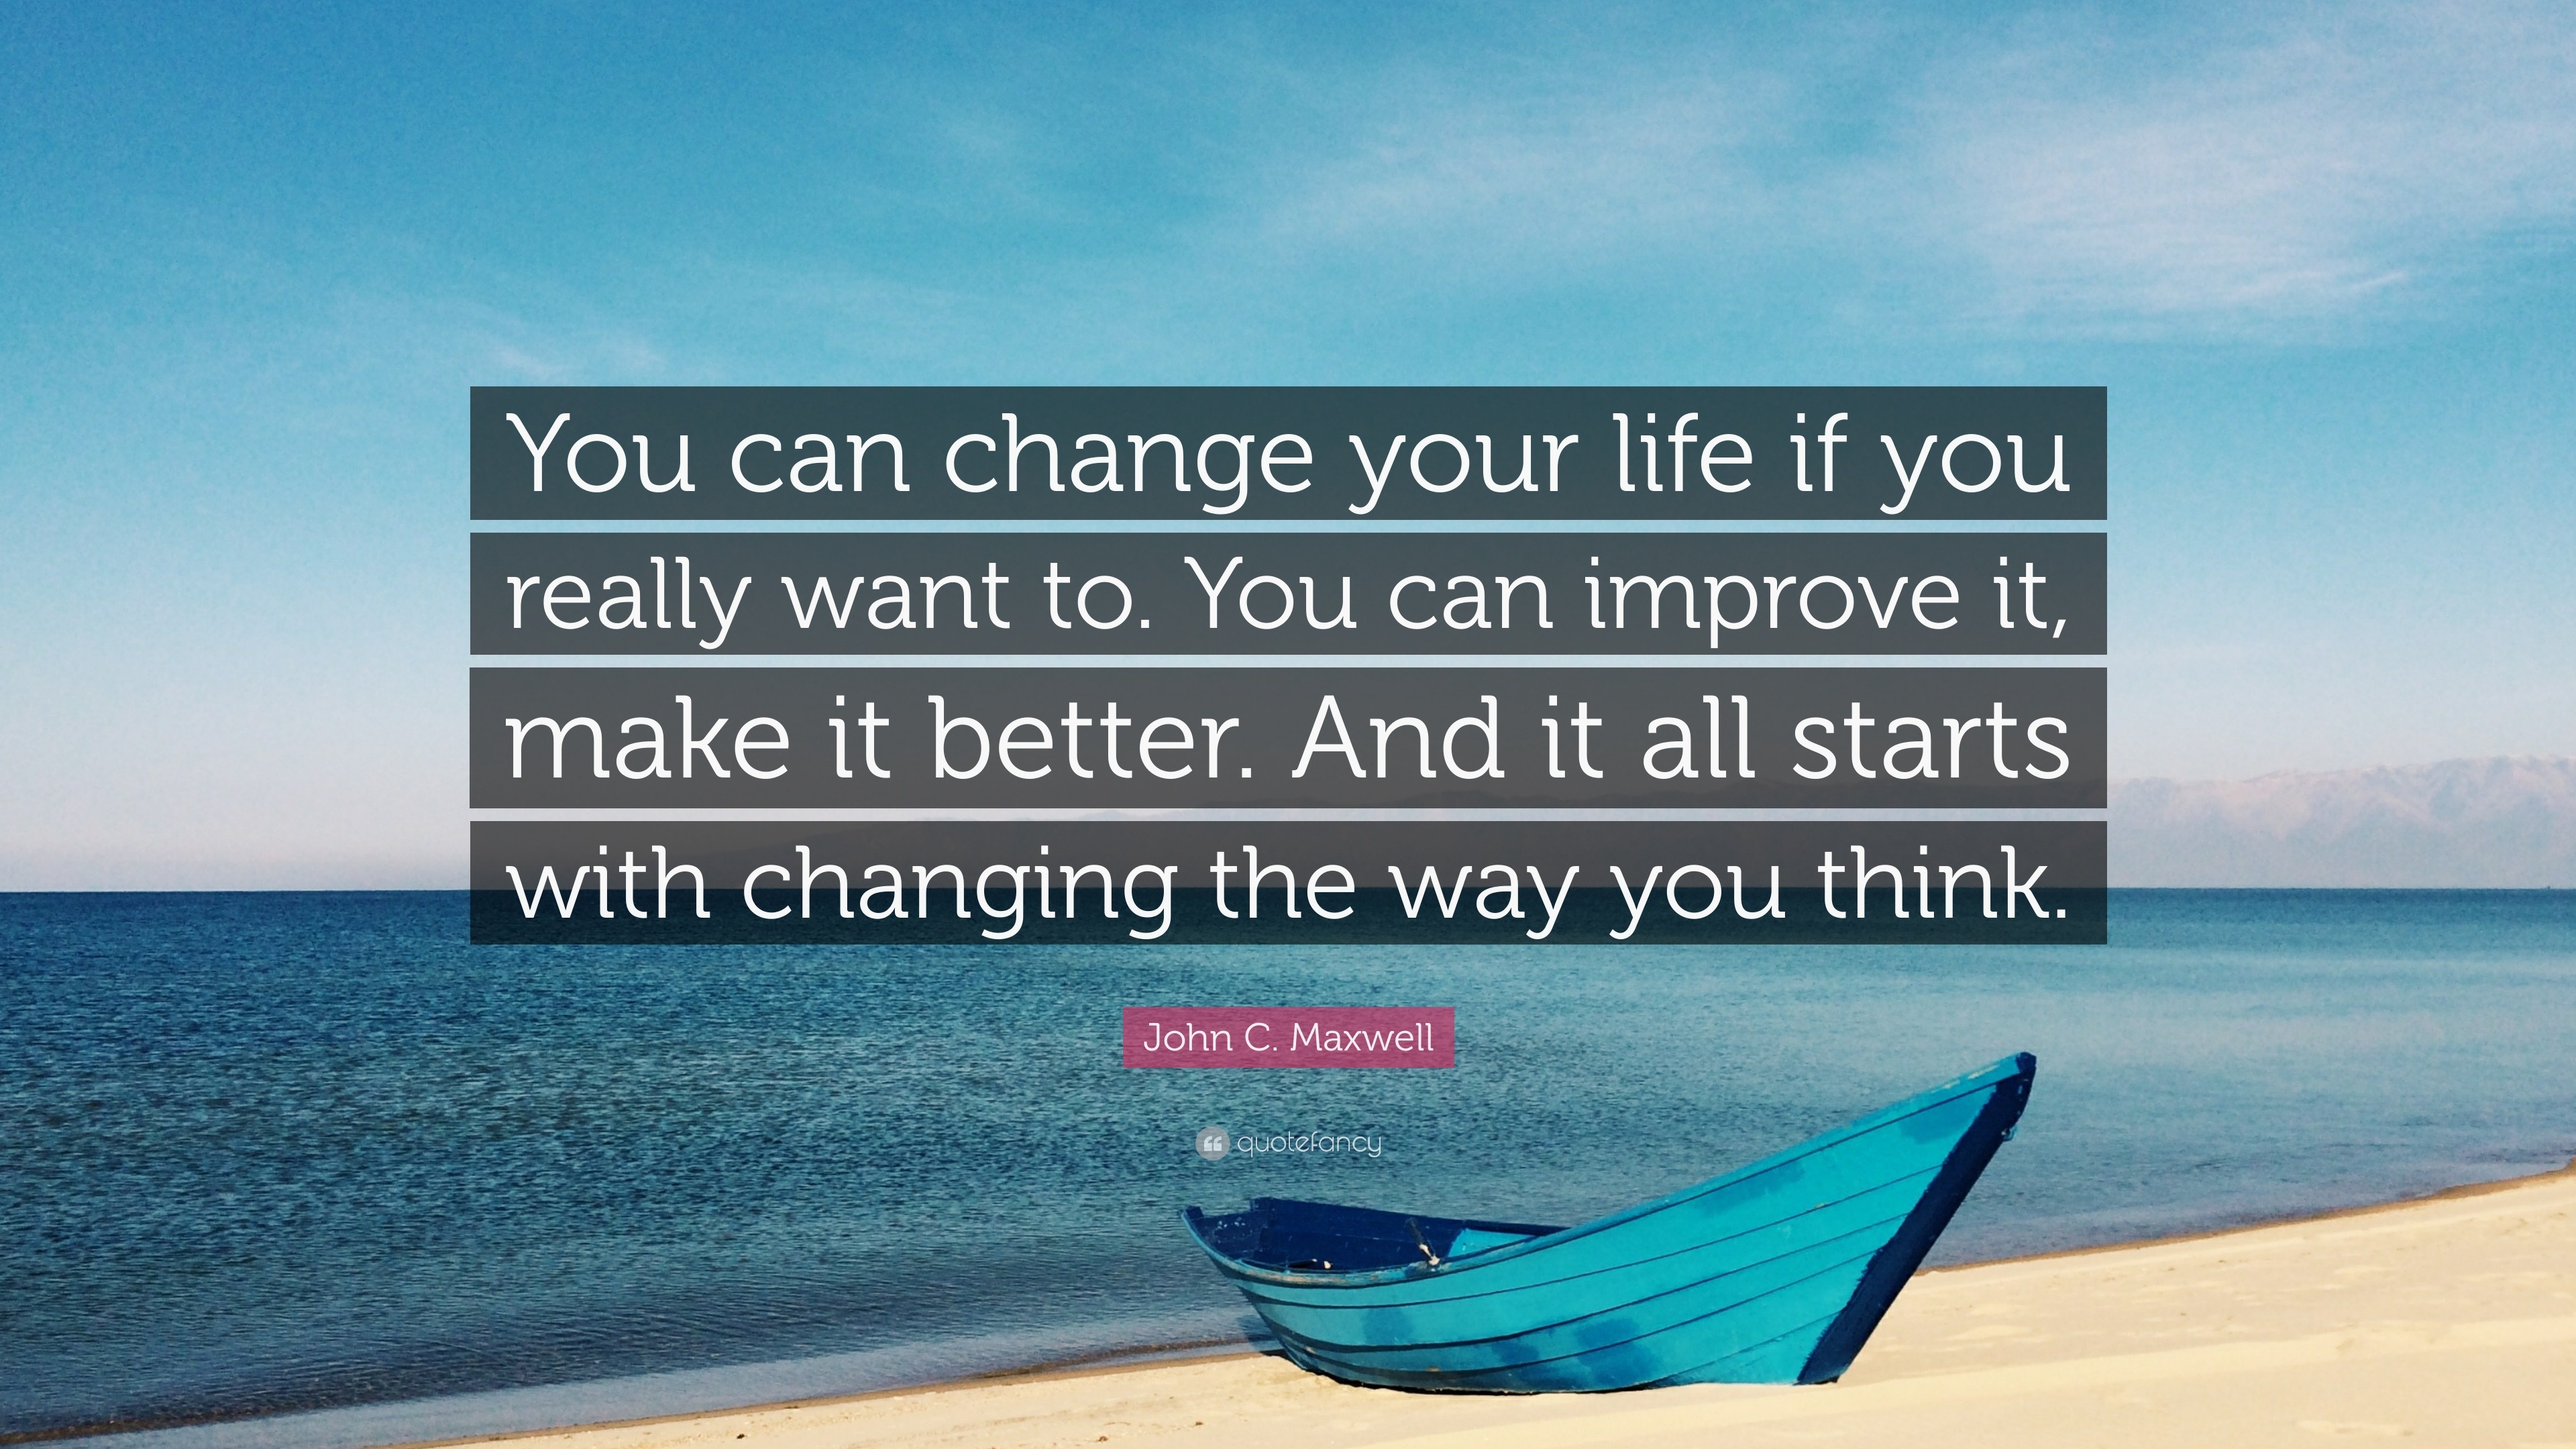 John C. Maxwell Quote: “You can change your life if you really